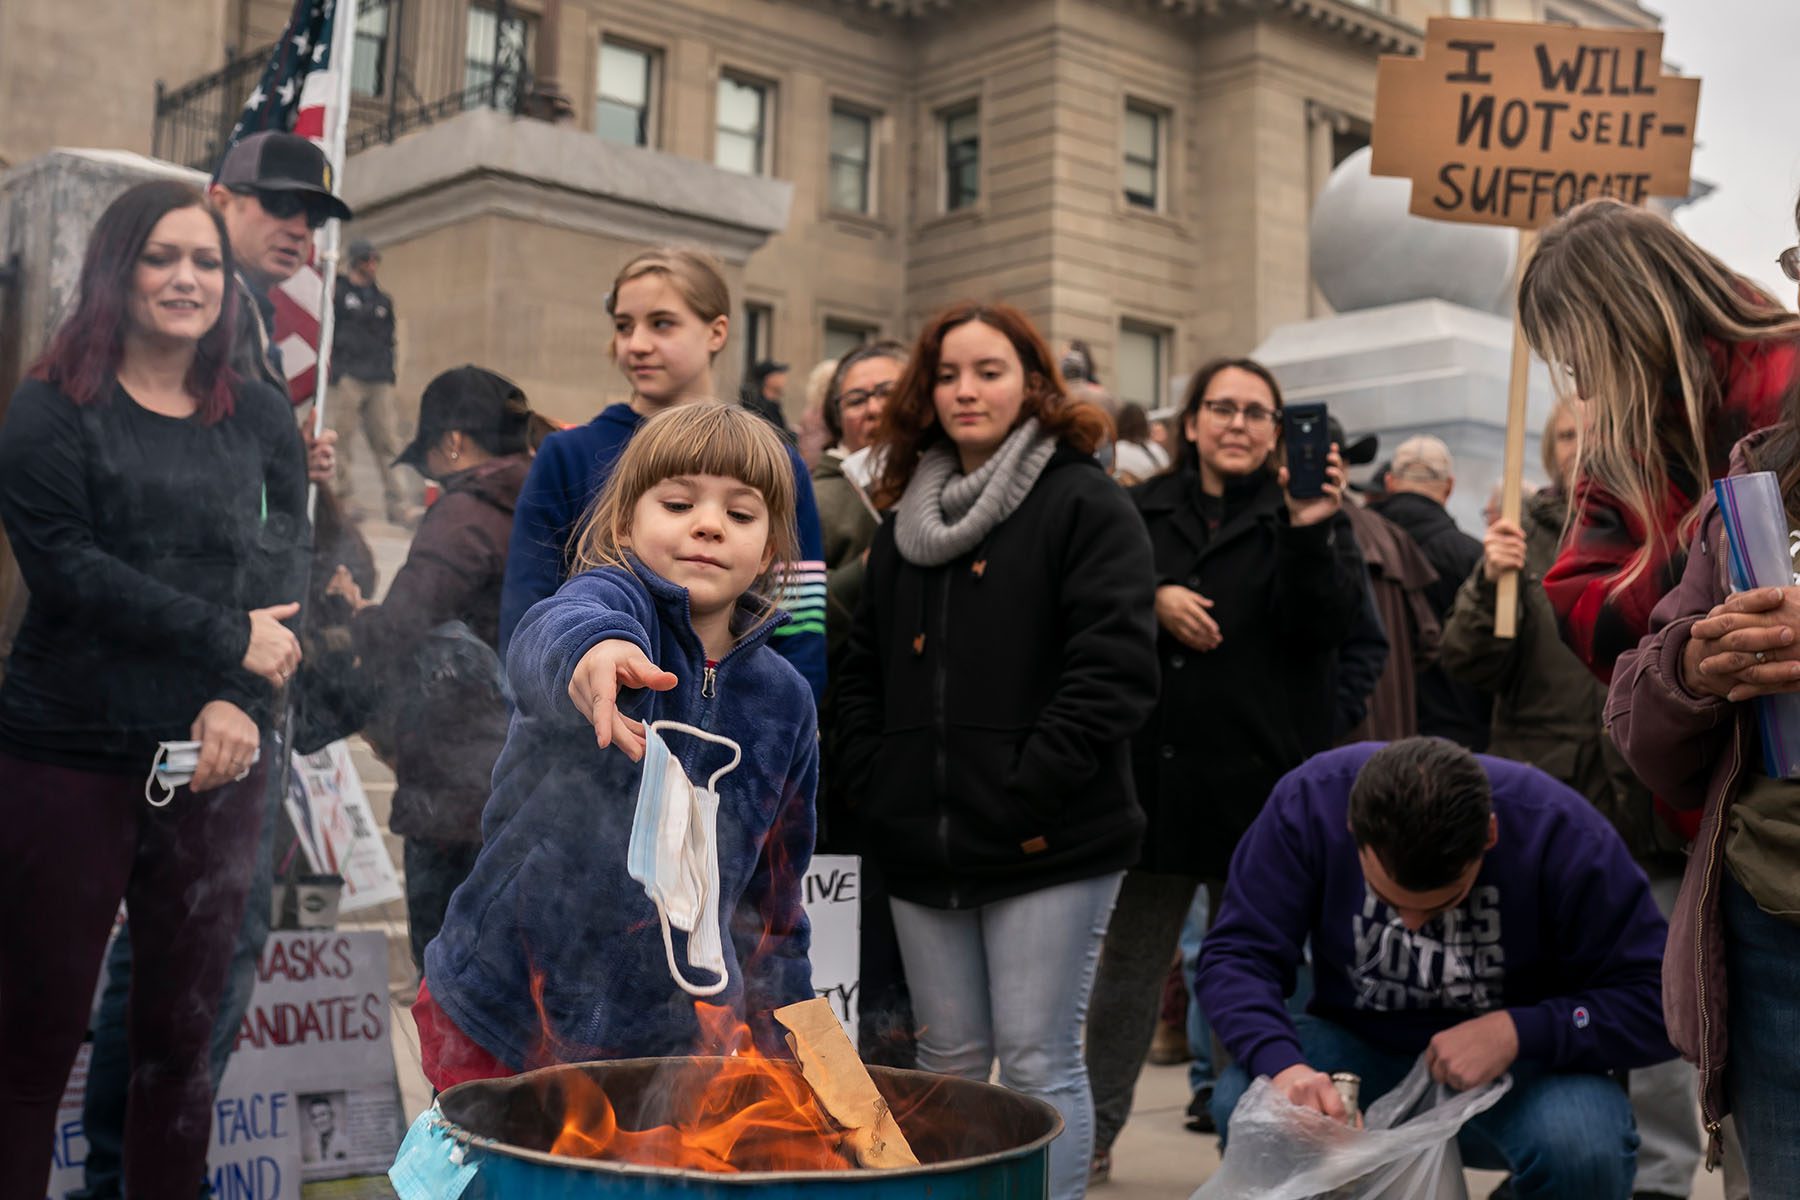 A child tosses a surgical mask into a fire. The child is surrounded by demonstrators holding American flags and signs, one of which reads "I will not self-suffocate."